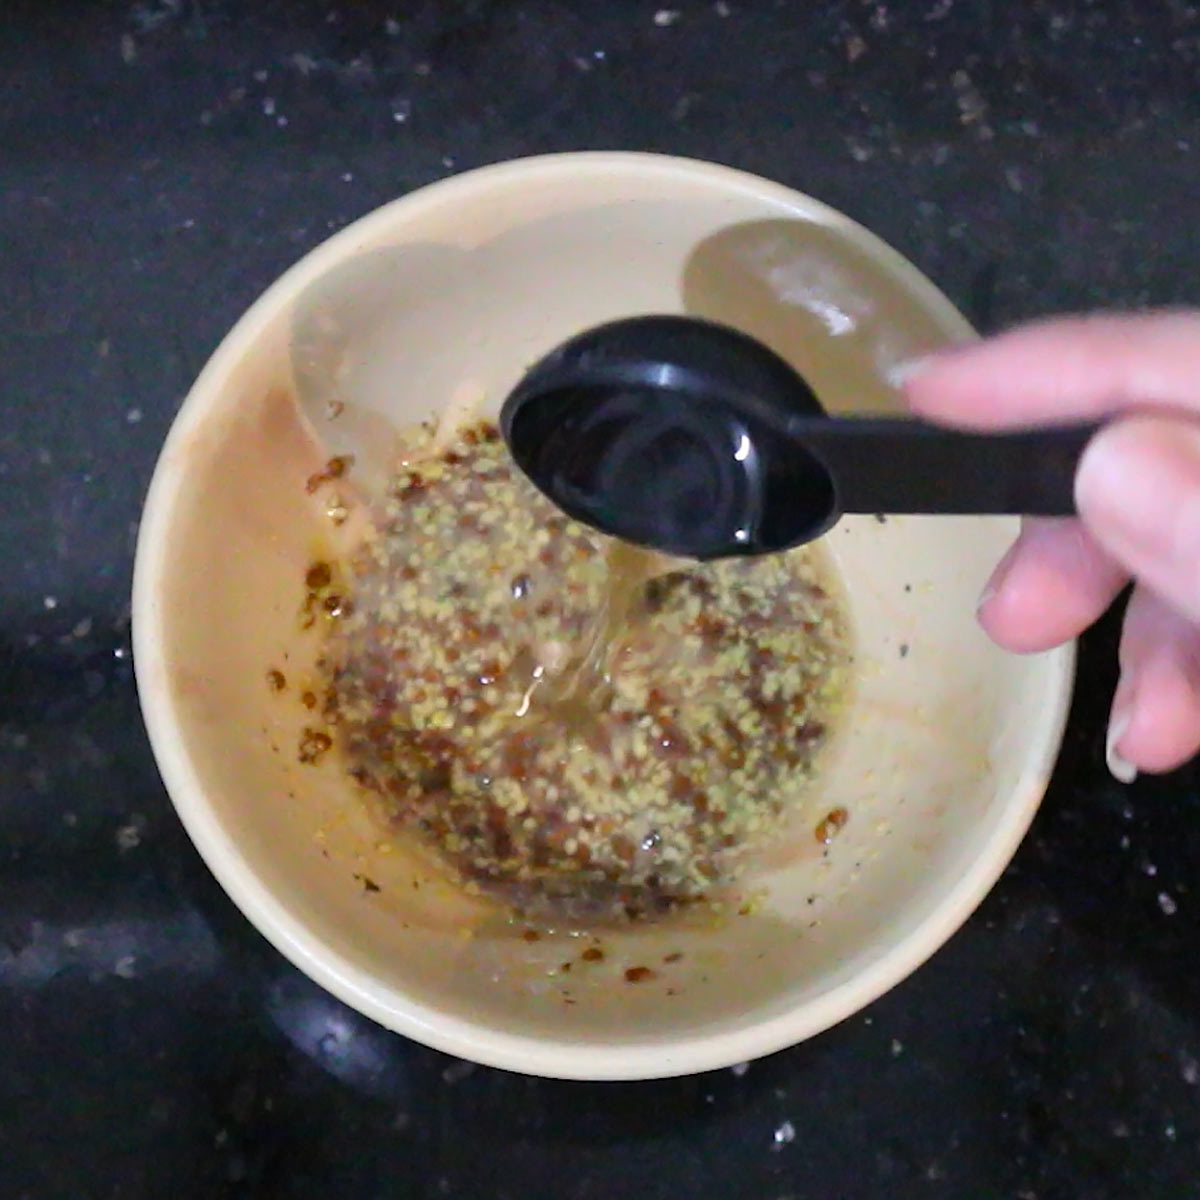 pouring oil to the other vinaigrette ingredients